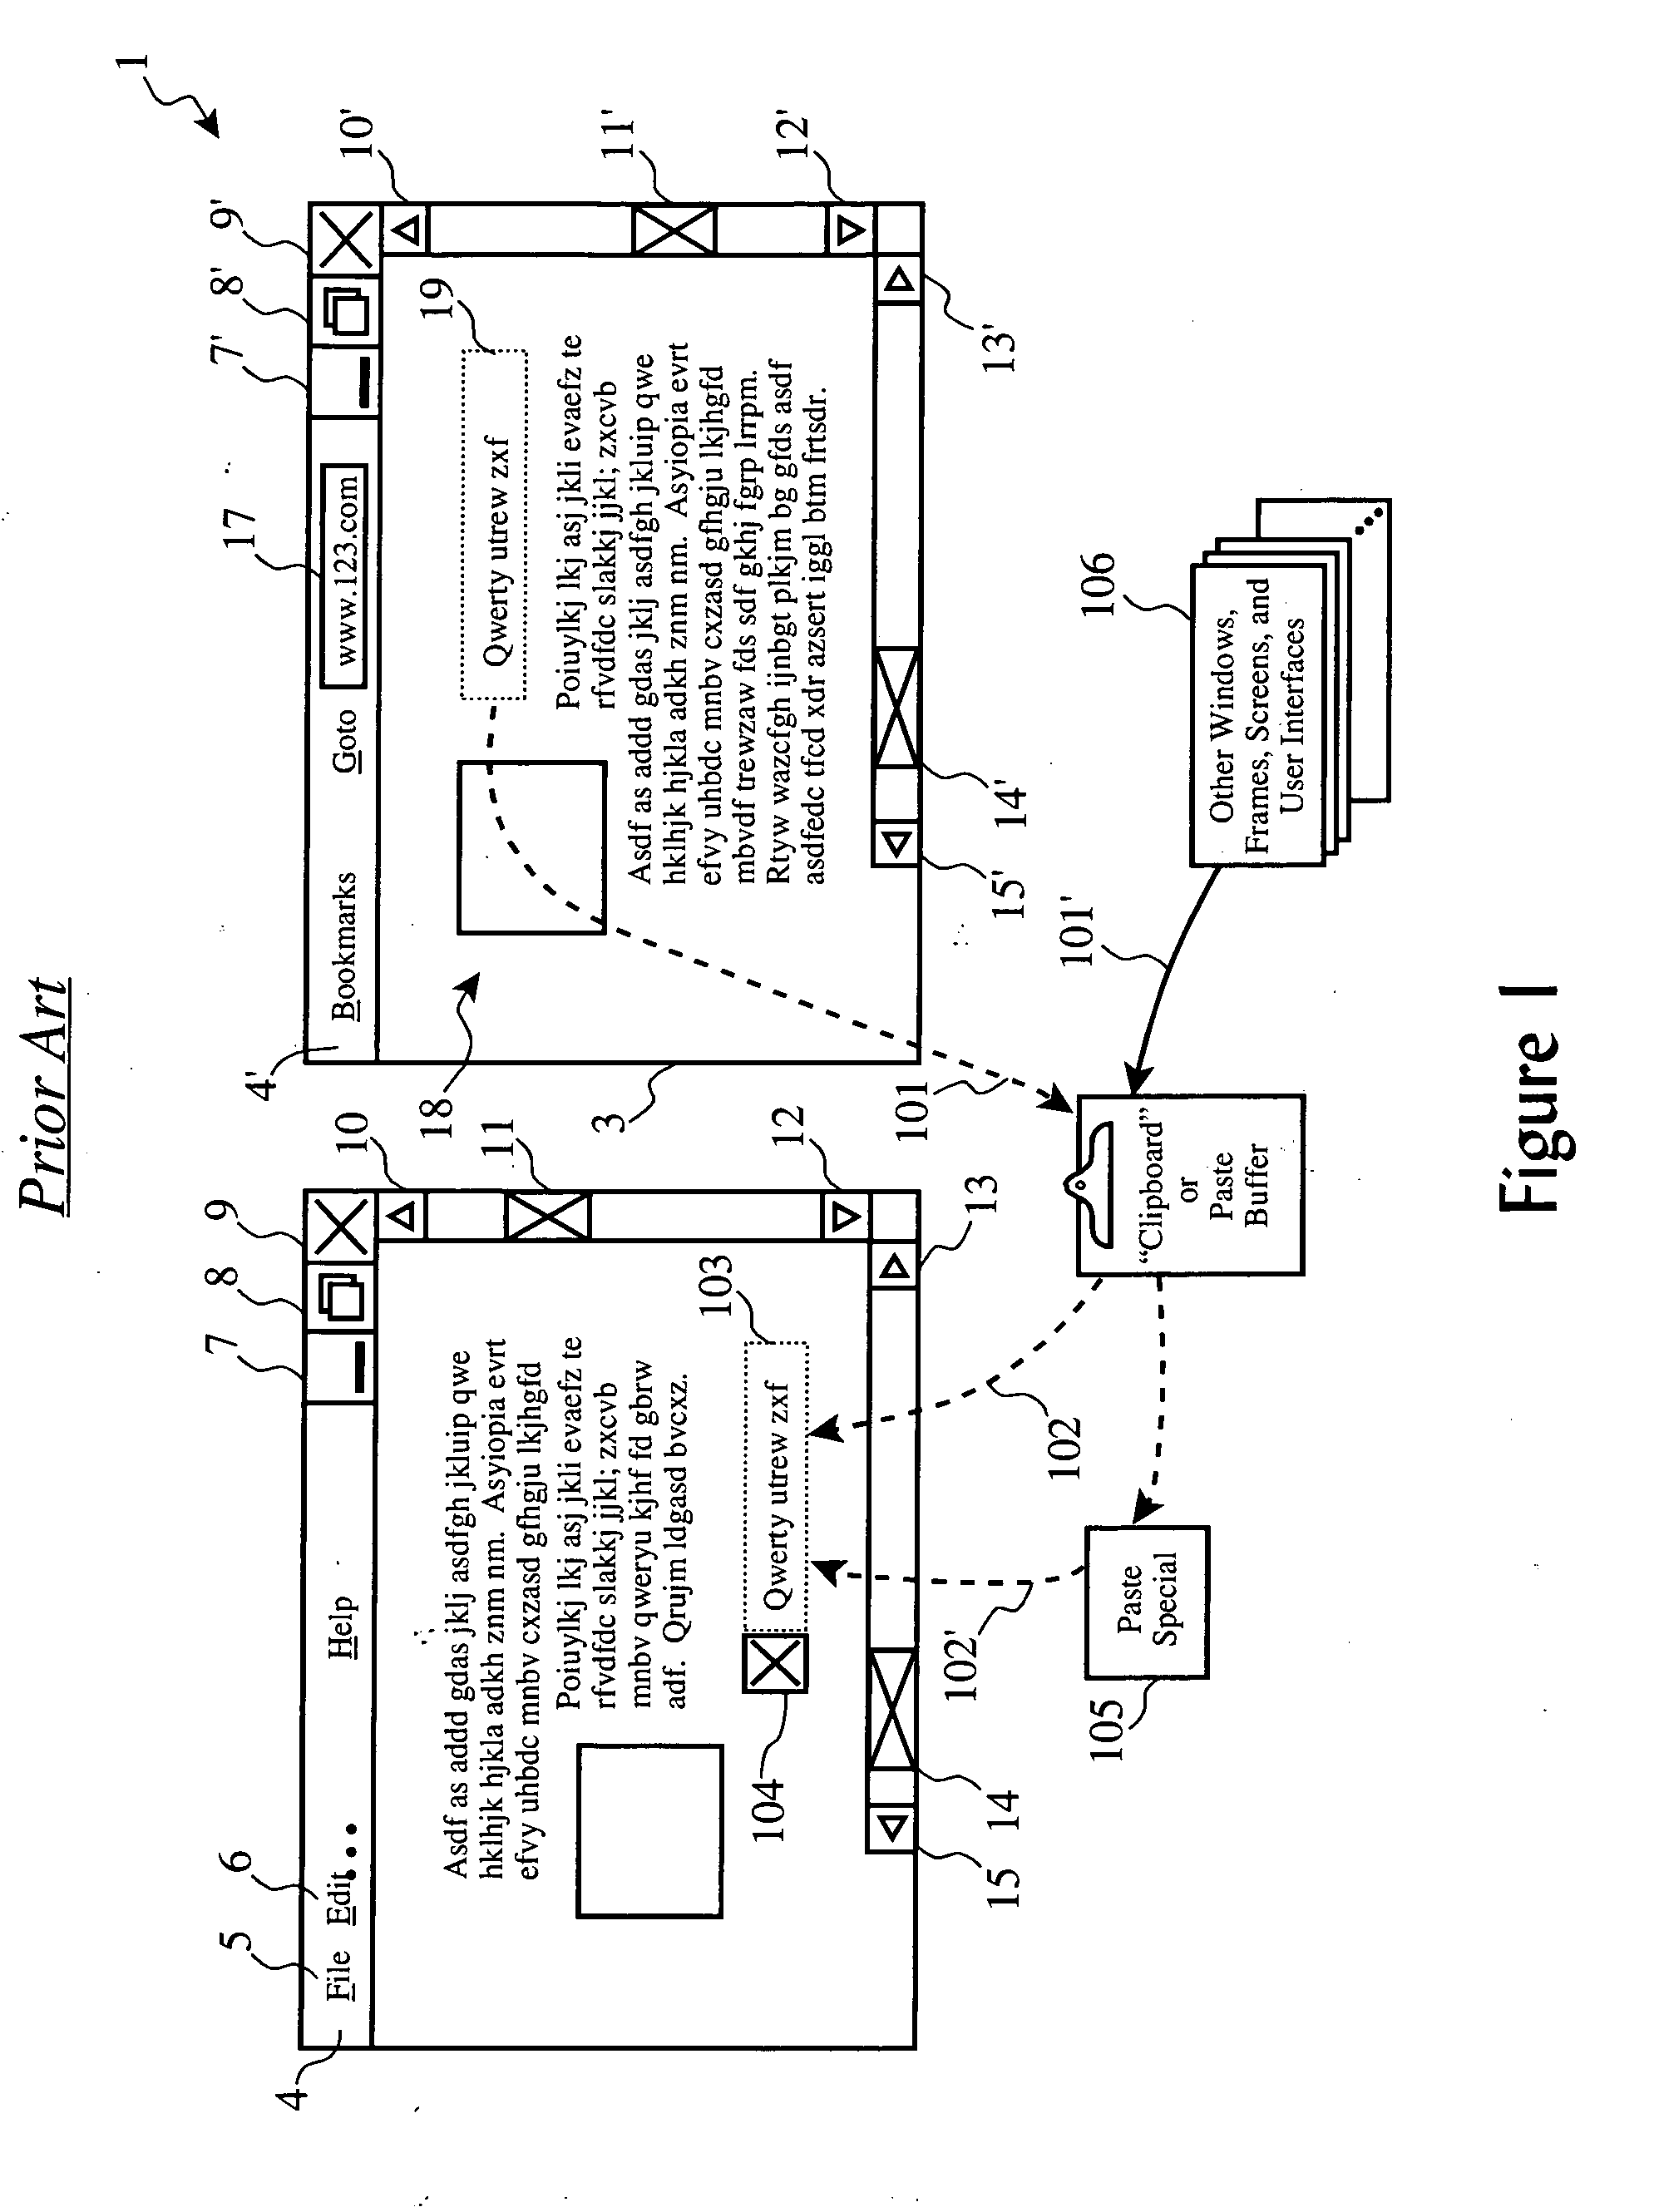 System and method for automatic natural language translation during information transfer